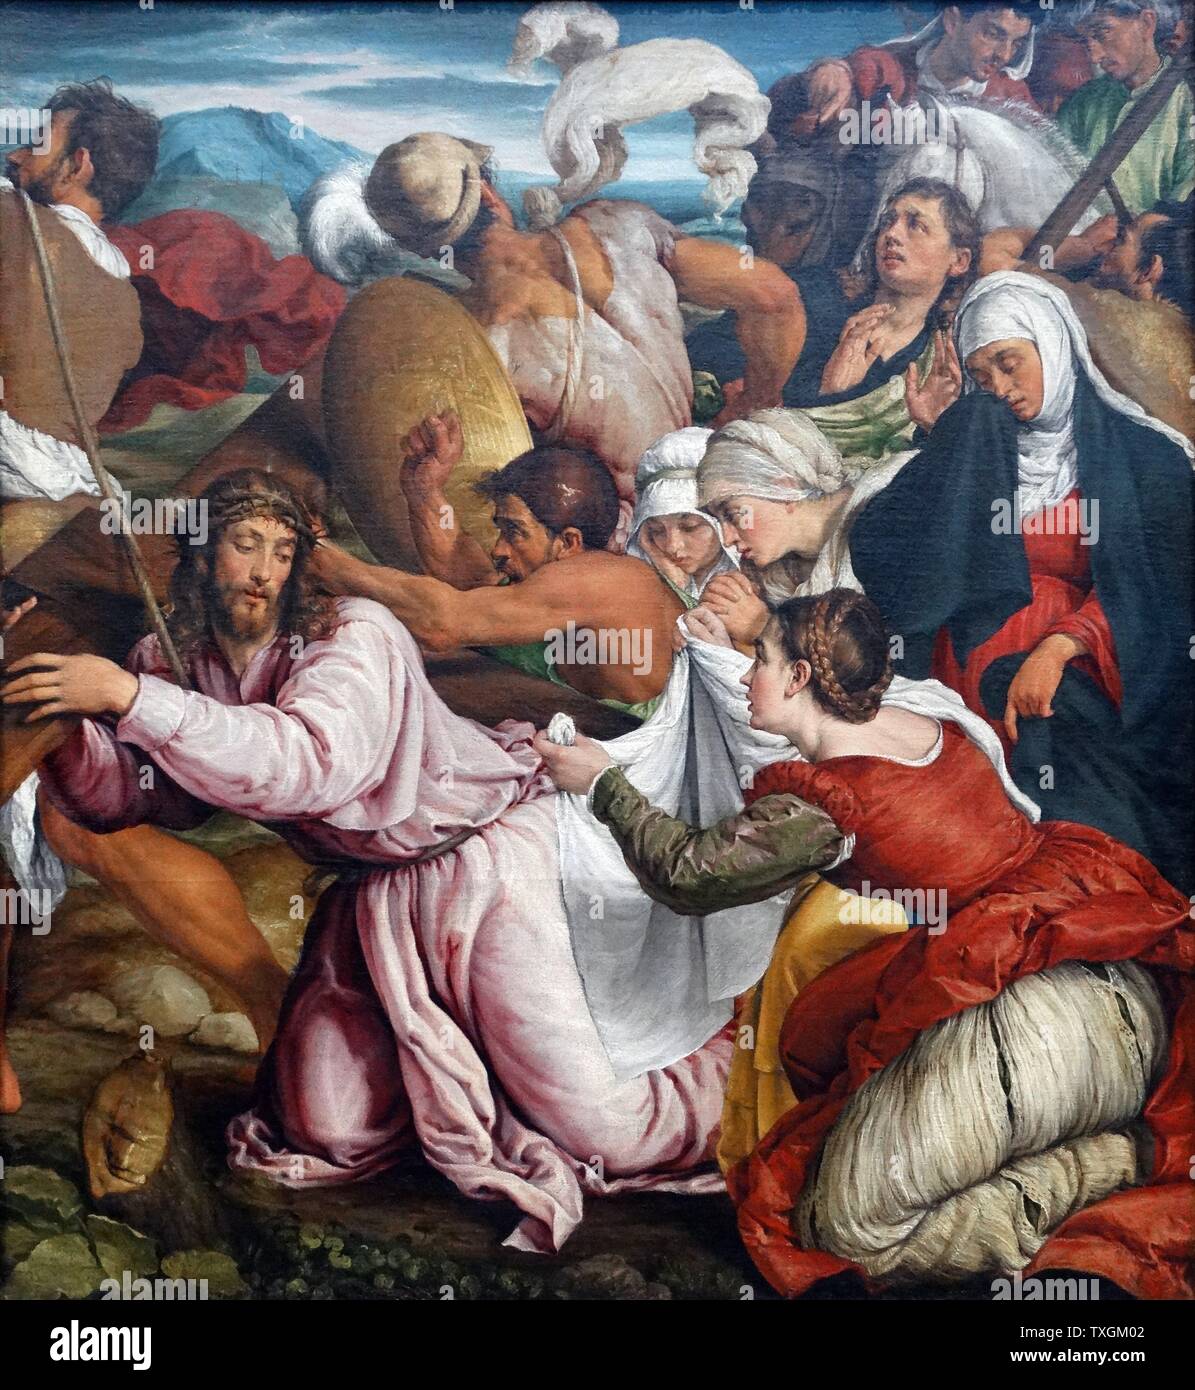 Painting titled 'The Way to Calvary' by Jacopo Bassano (1510-1592) an Italian artist and pupil of Bonifazio Veronese. Dated 16th Century Stock Photo